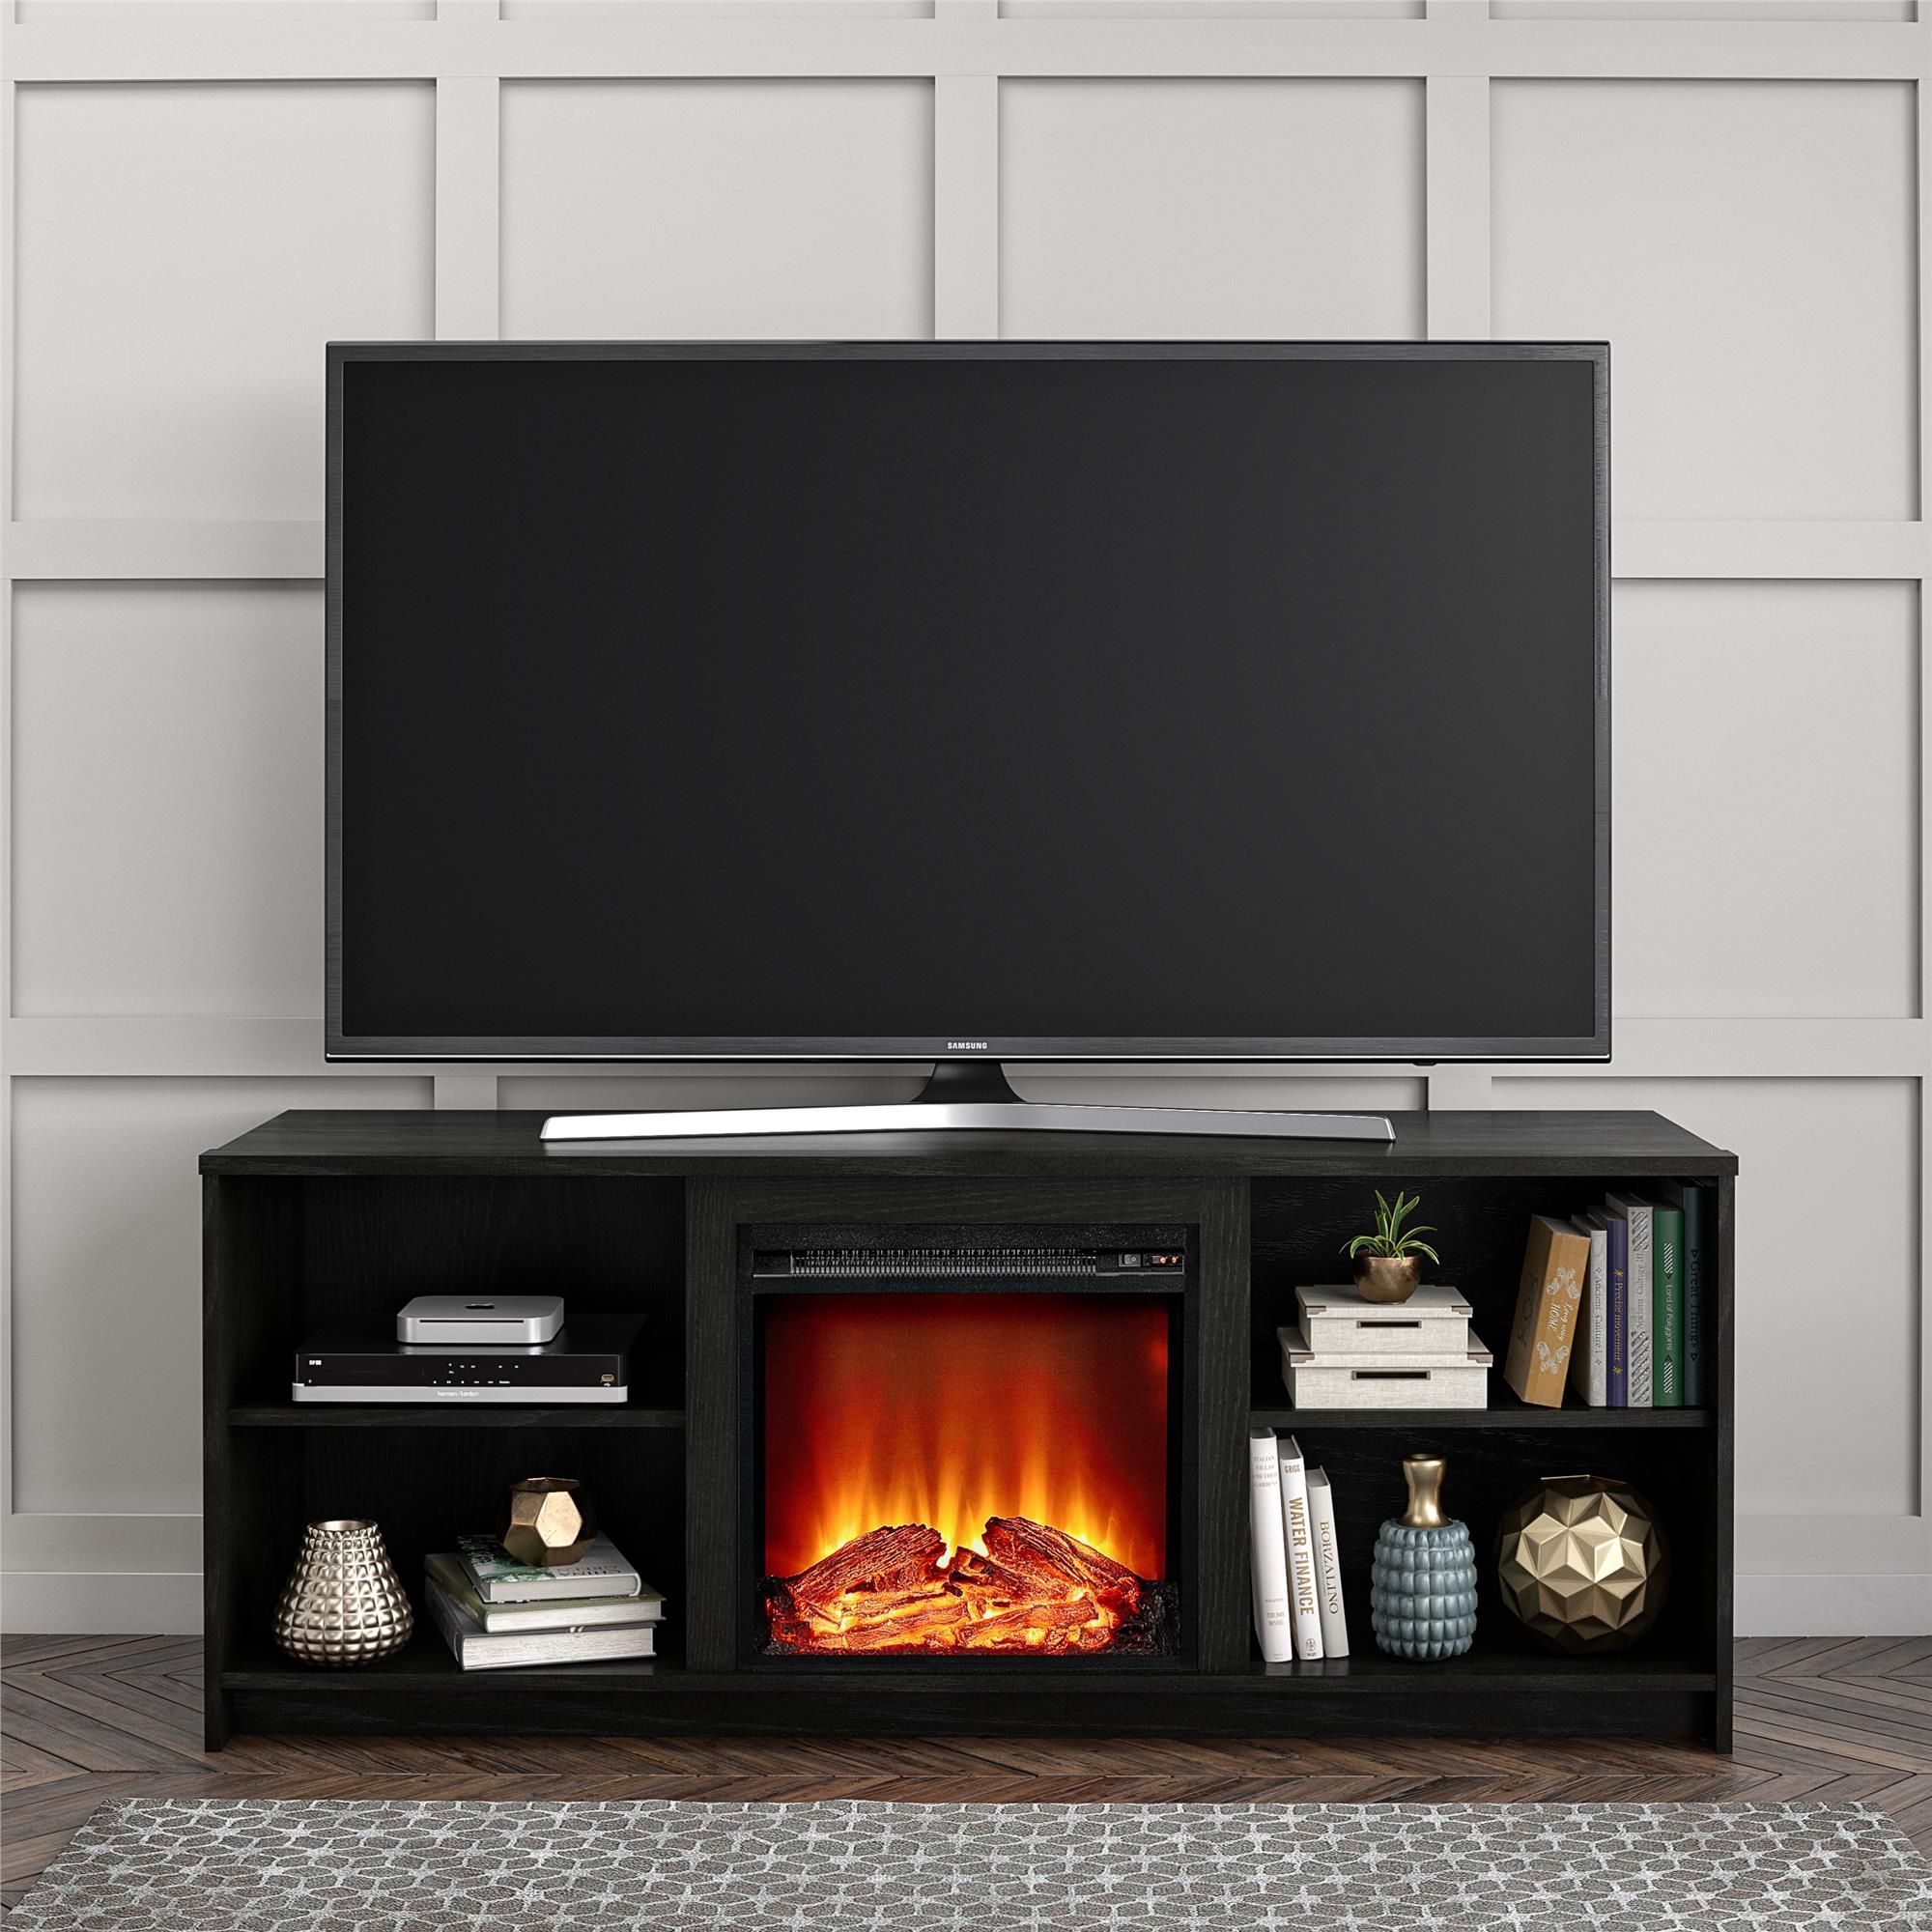 Mainstays Fireplace Tv Stand For Tvs Up To 65", Black Oak With Regard To Adrien Tv Stands For Tvs Up To 65" (View 8 of 15)